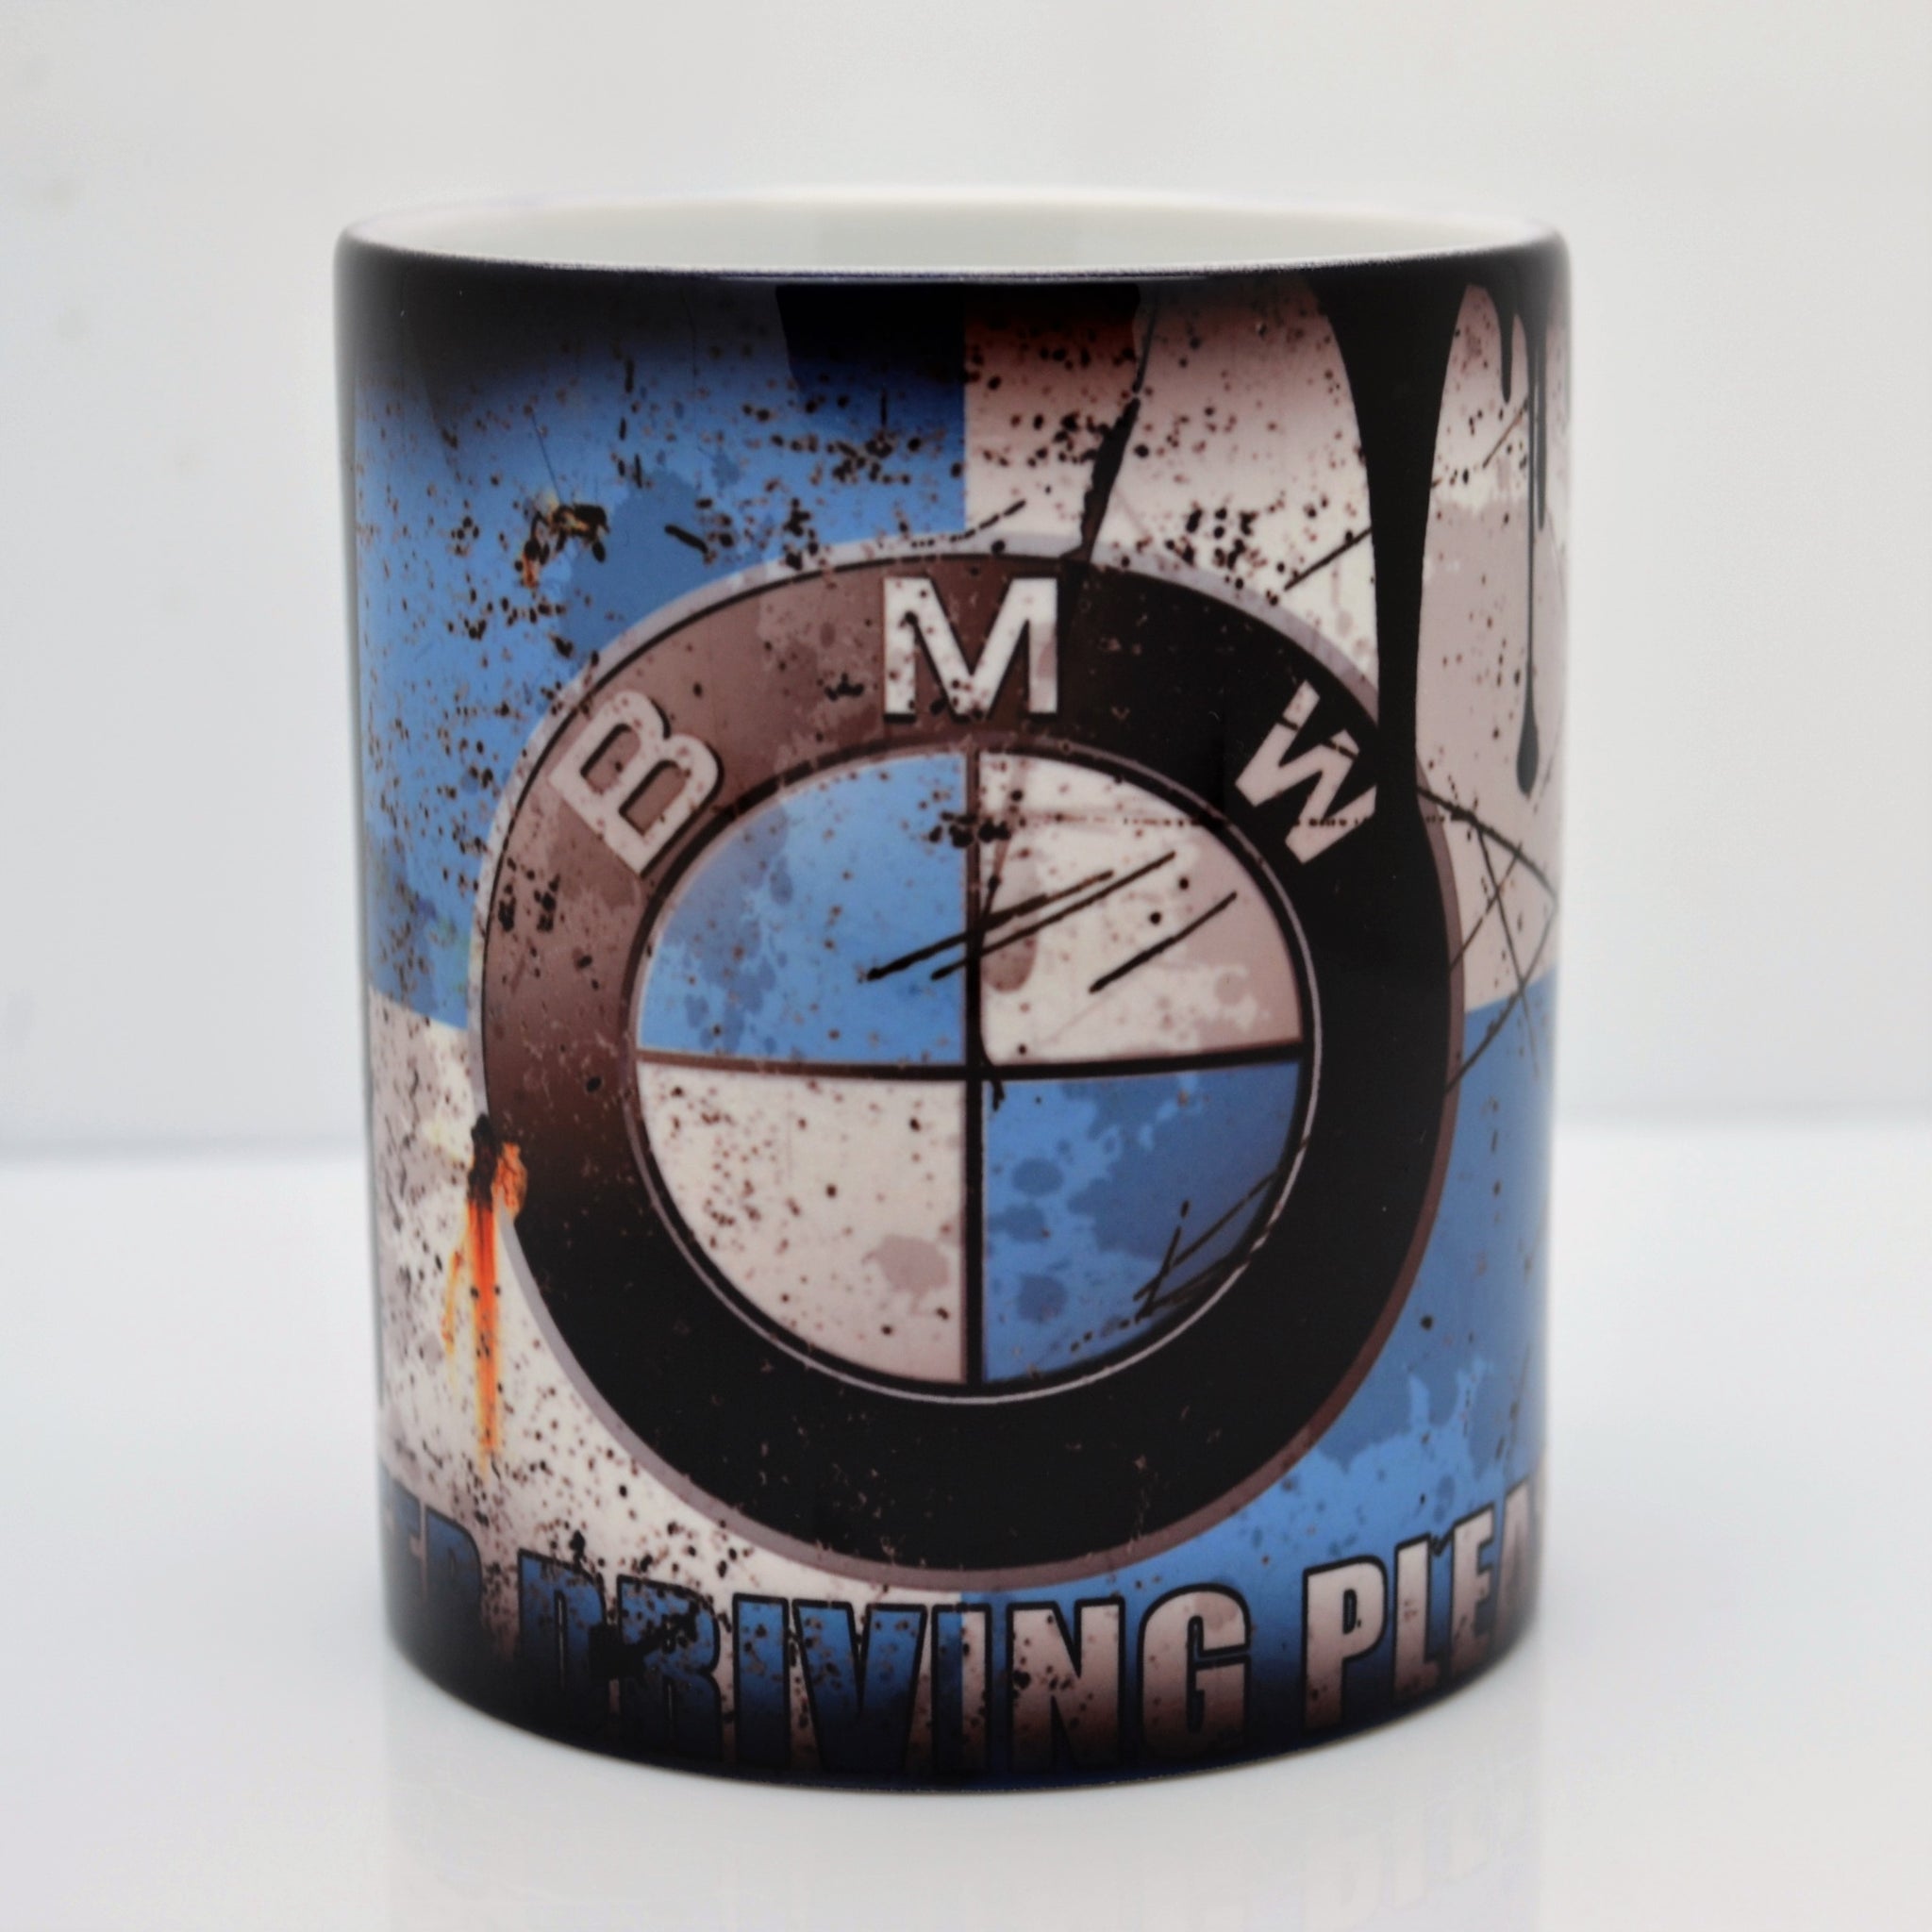 Nostalgic-Art Retro Coffee Mug, BMW - Drivers Only - Gift Idea for Car Accessories Fans, Large Ceramic Cup, Vintage Design, 112